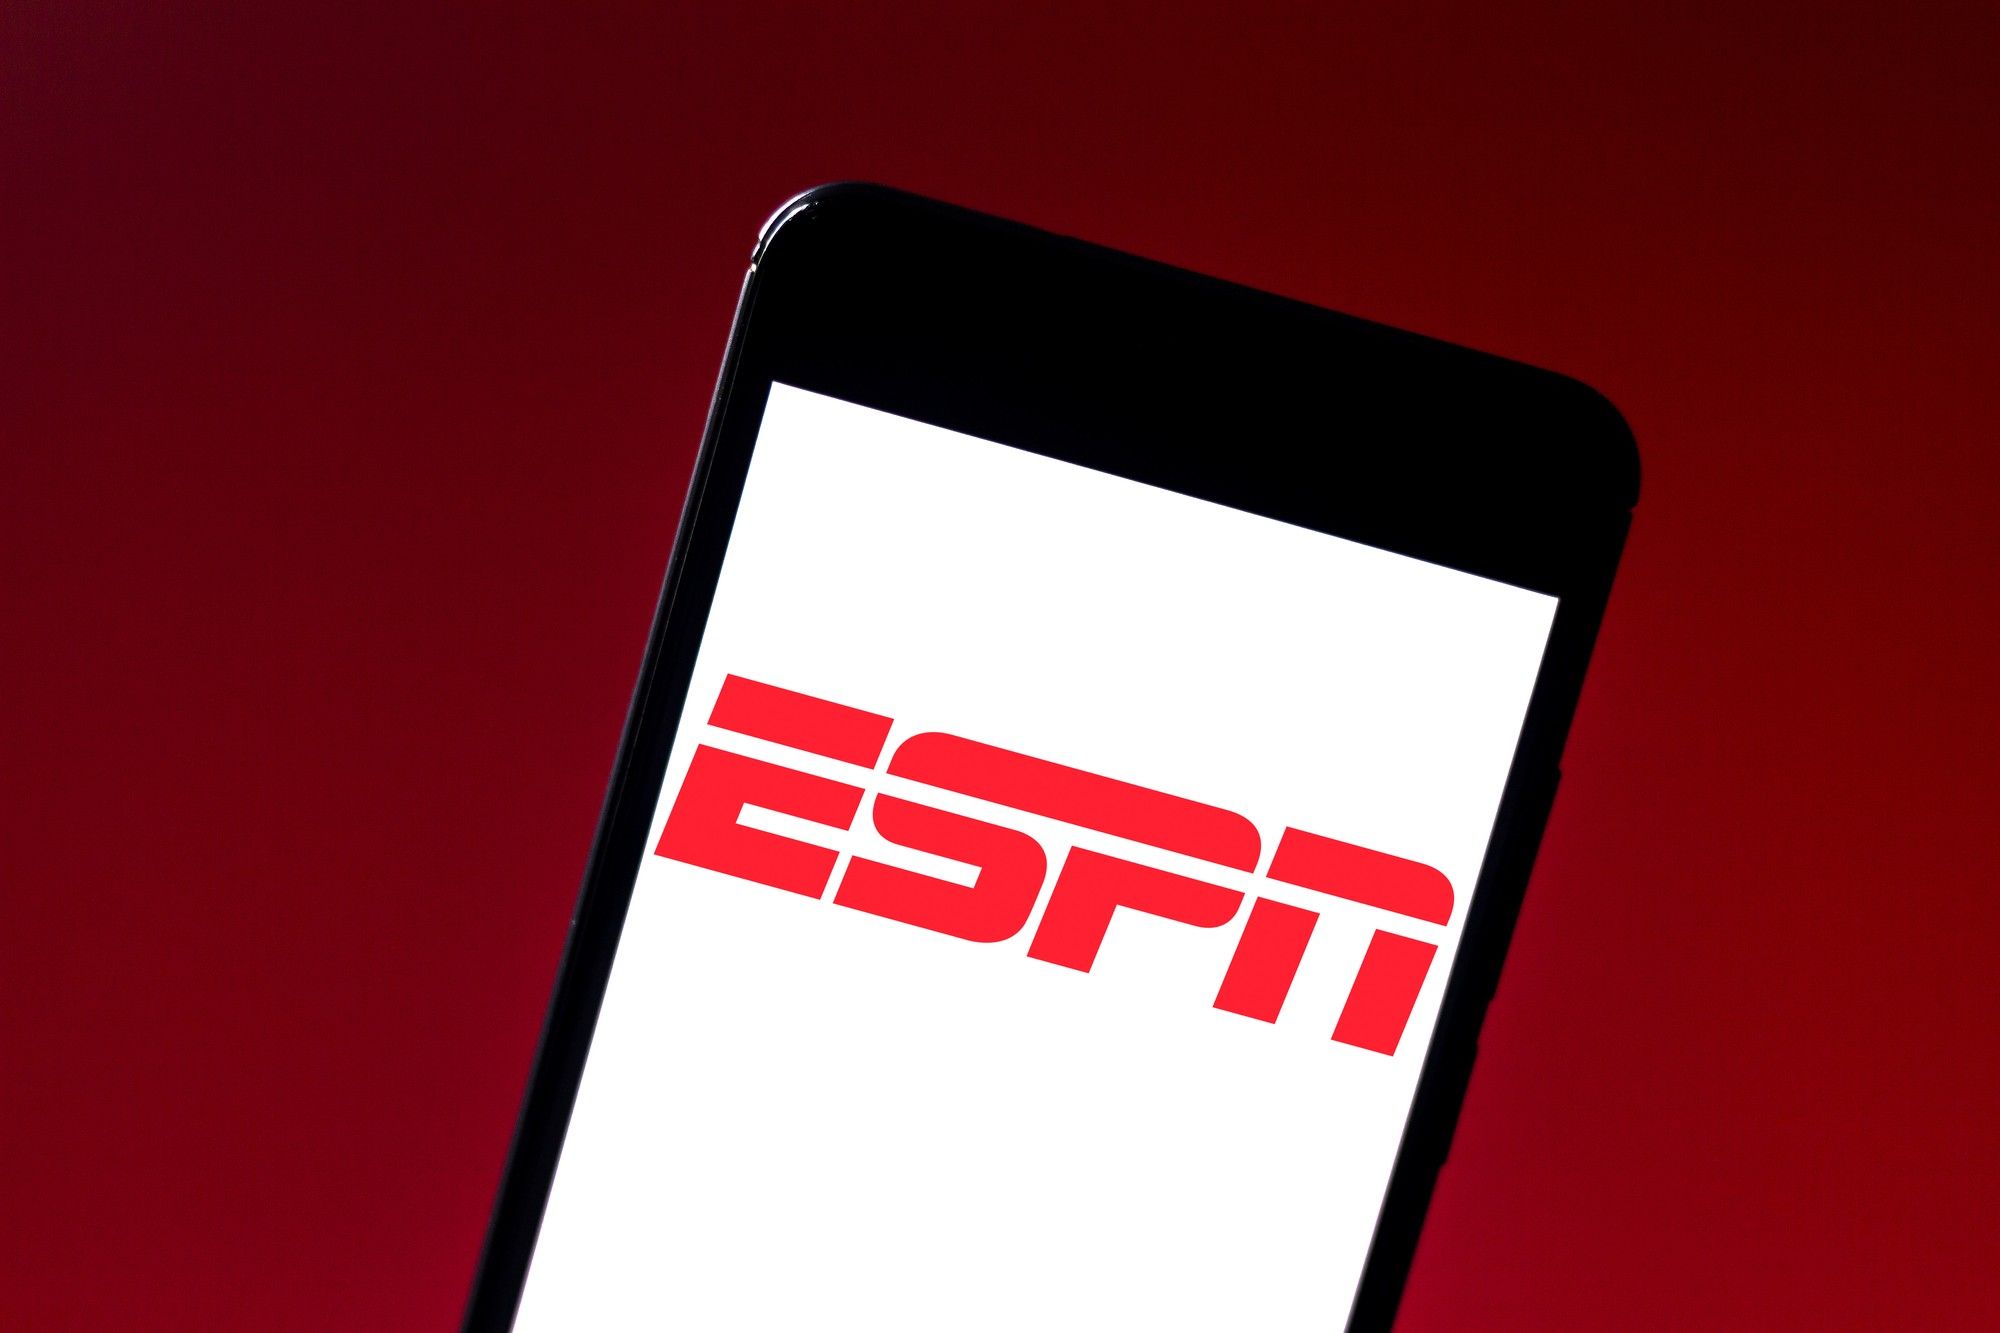 ESPN class action lawsuit has been filed over labor laws and whistleblower violation.